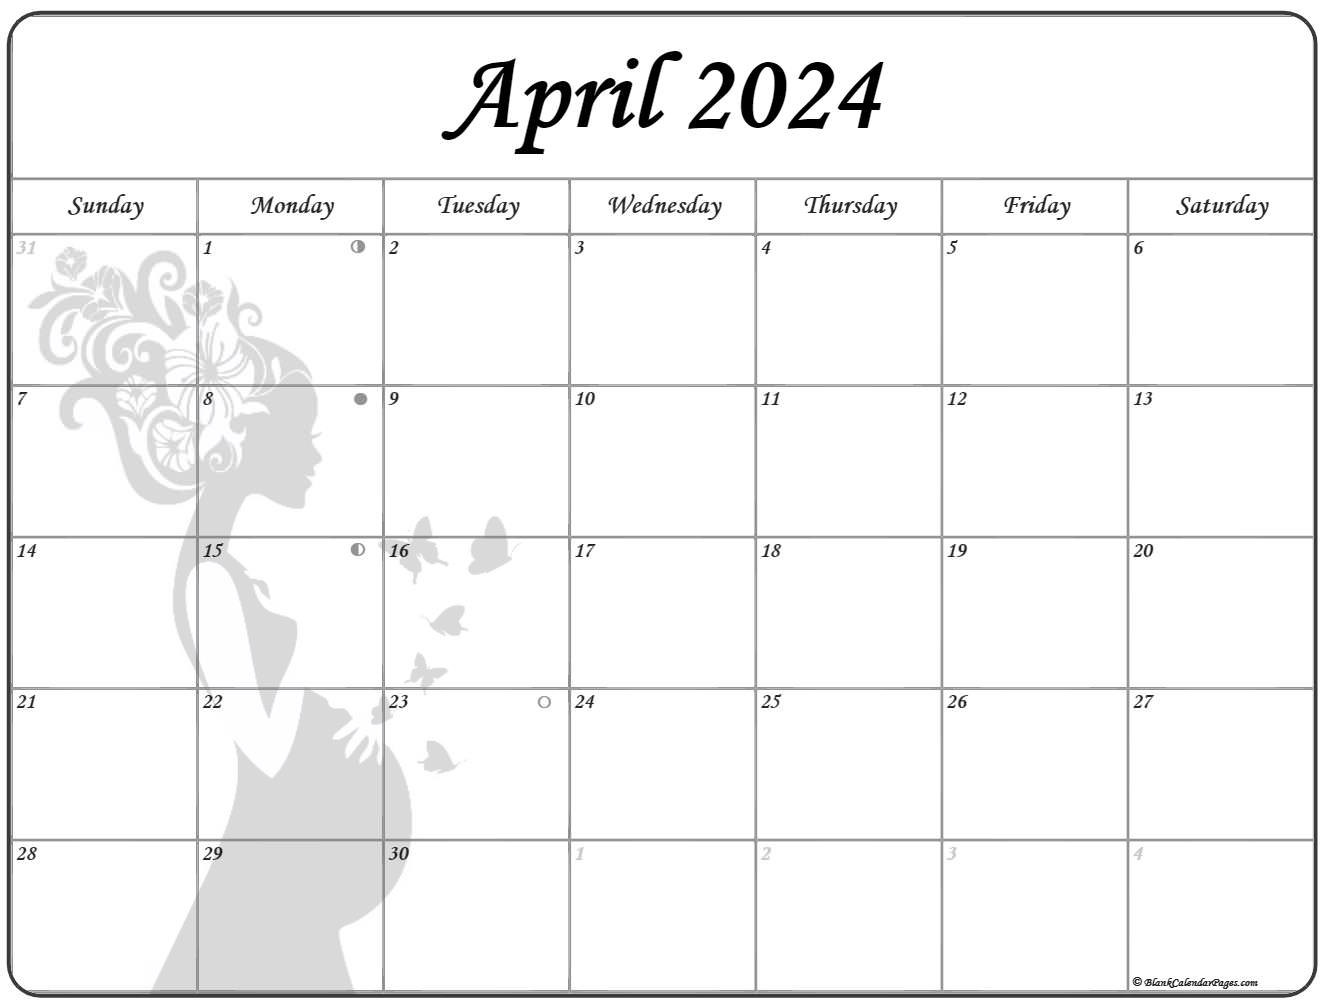 Collection Of April 2022 Photo Calendars With Image Filters